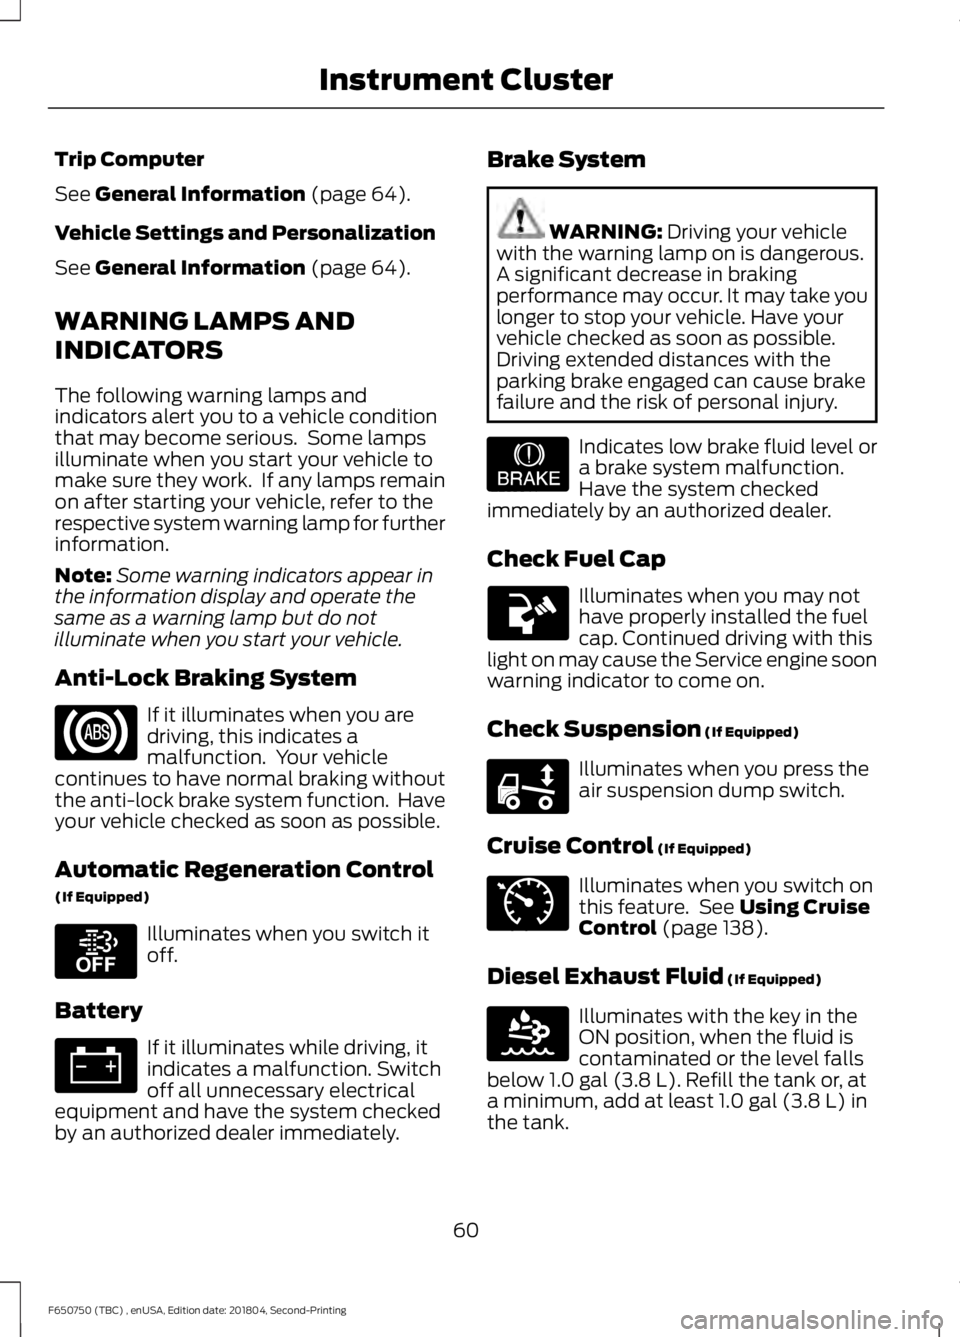 FORD F650/750 2019  Owners Manual Trip Computer
See General Information (page 64).
Vehicle Settings and Personalization
See 
General Information (page 64).
WARNING LAMPS AND
INDICATORS
The following warning lamps and
indicators alert 